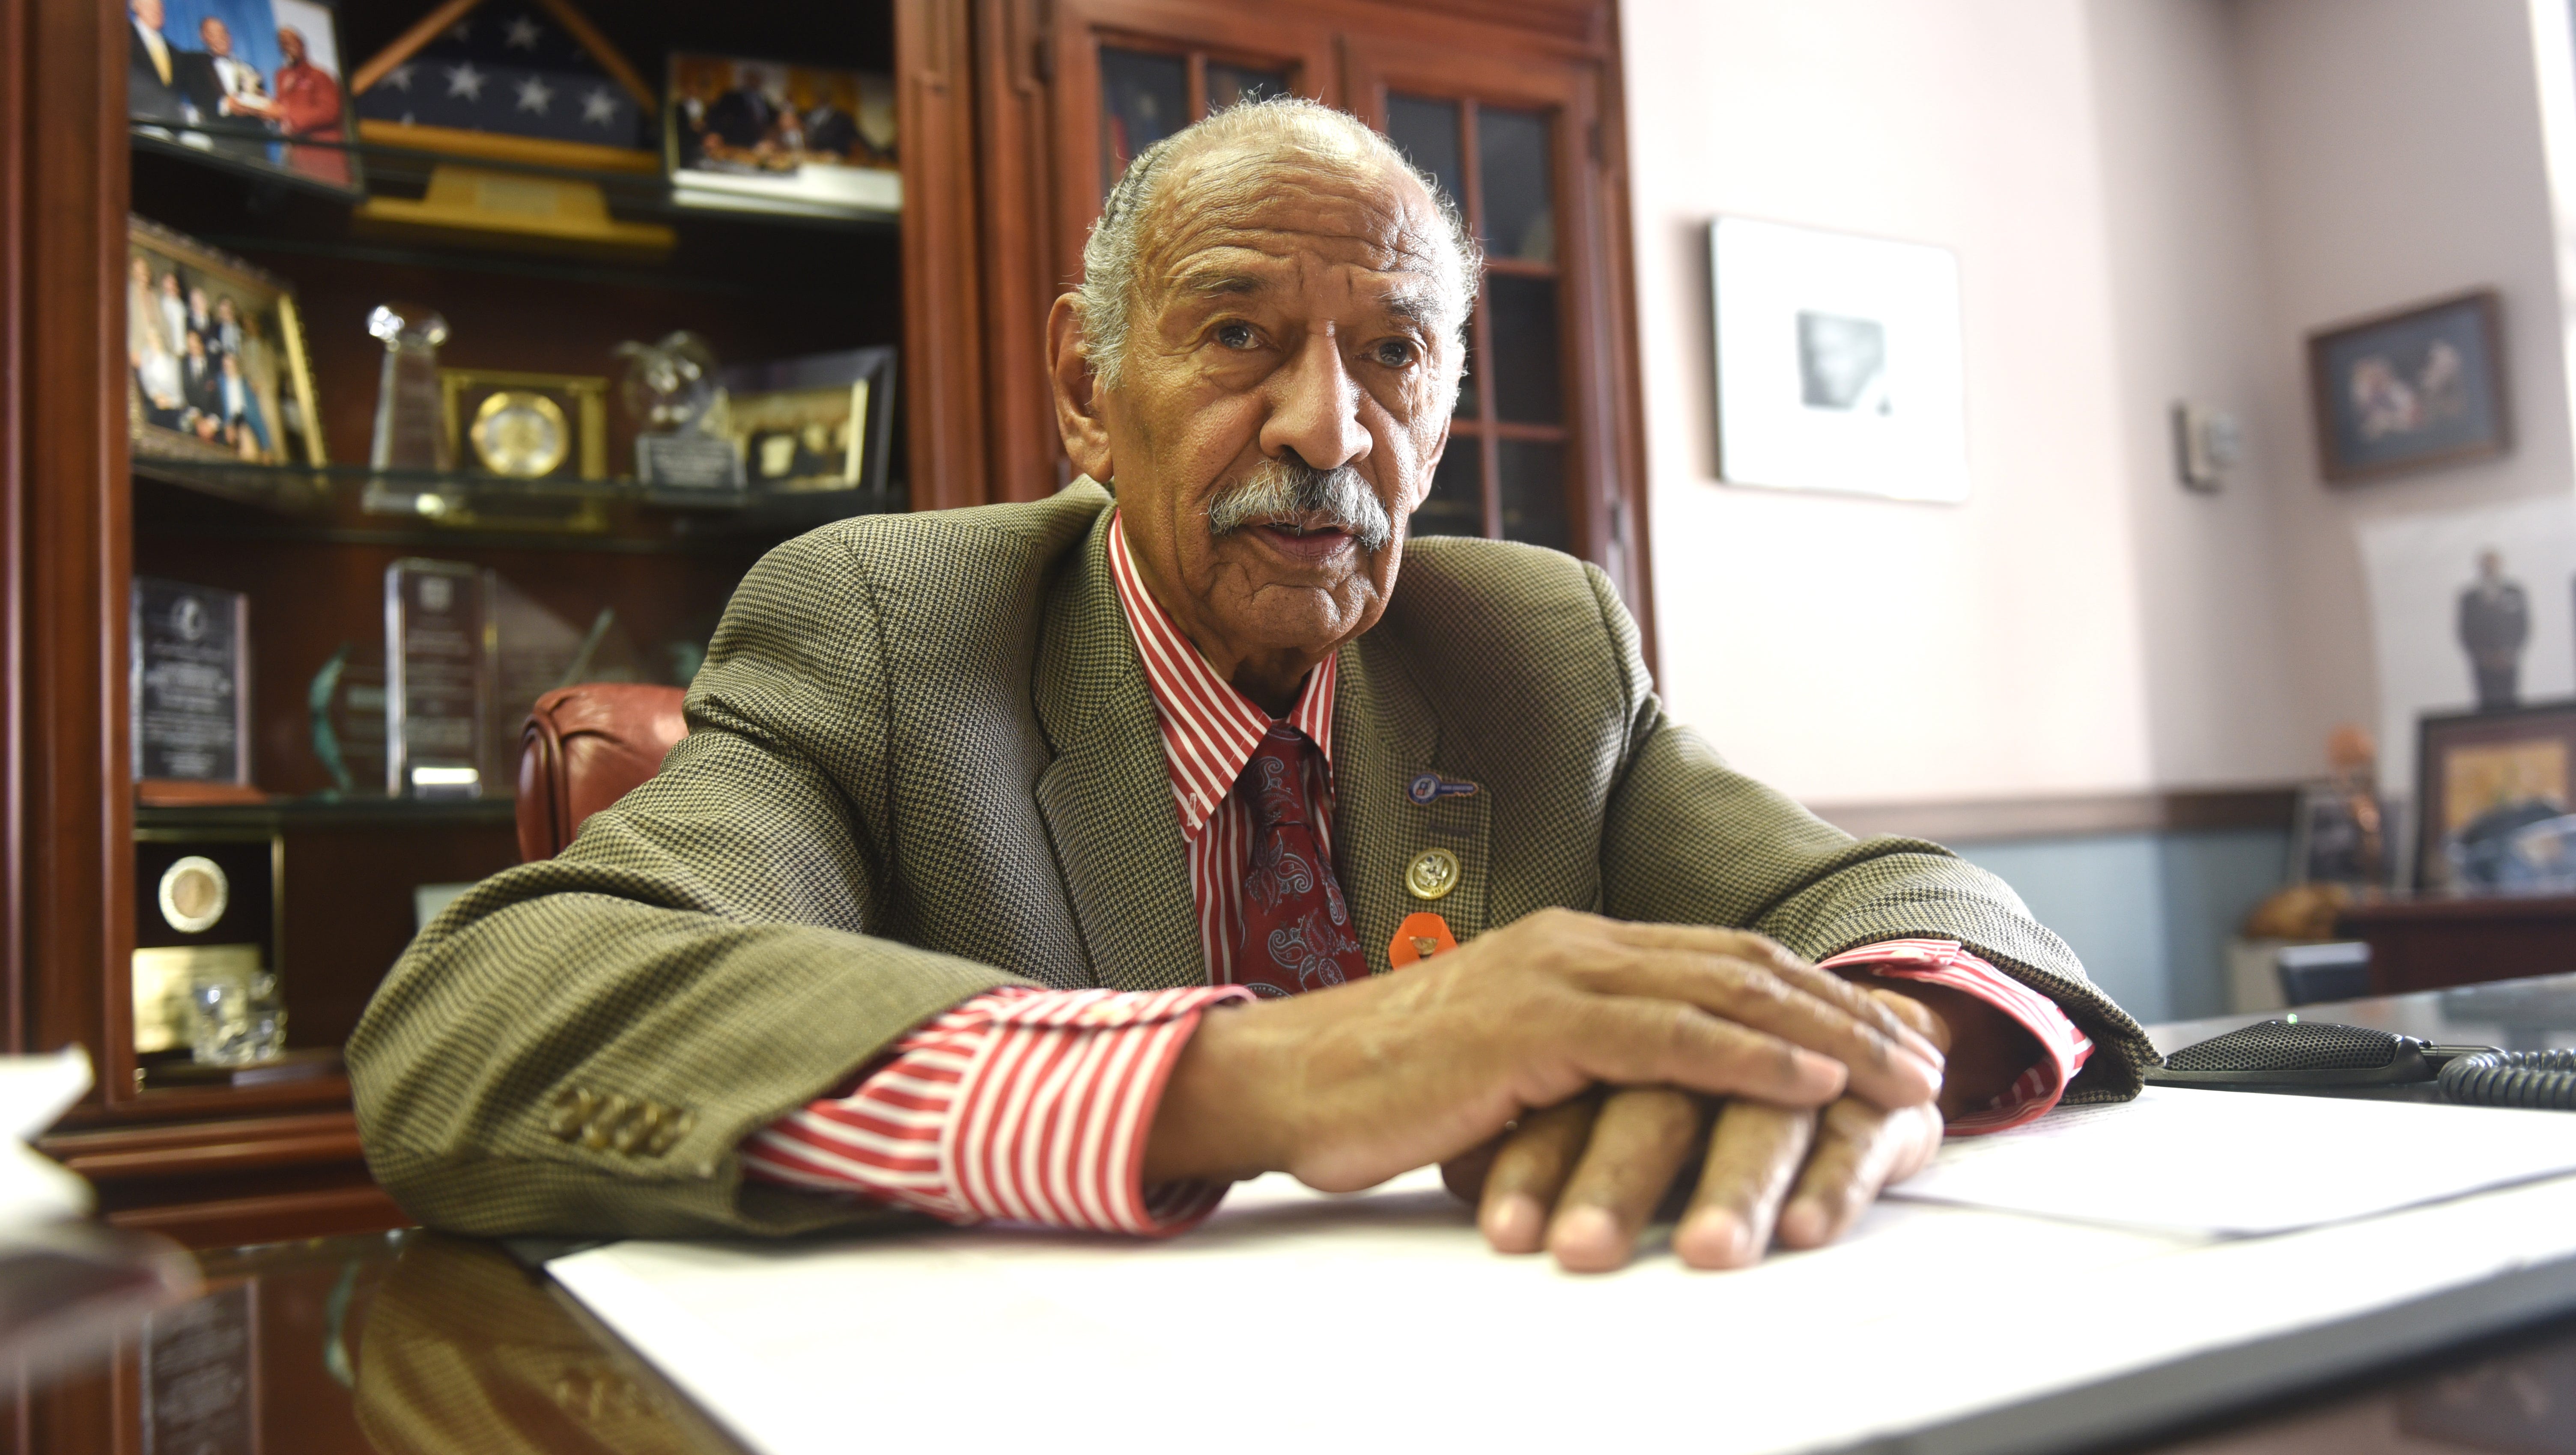 Conyers is interviewed in his Detroit offices in June 2017 about the 1967 Detroit unrest. "Collectively, a fuse was blown," he said. "People just lost it ... and the police overreacted."